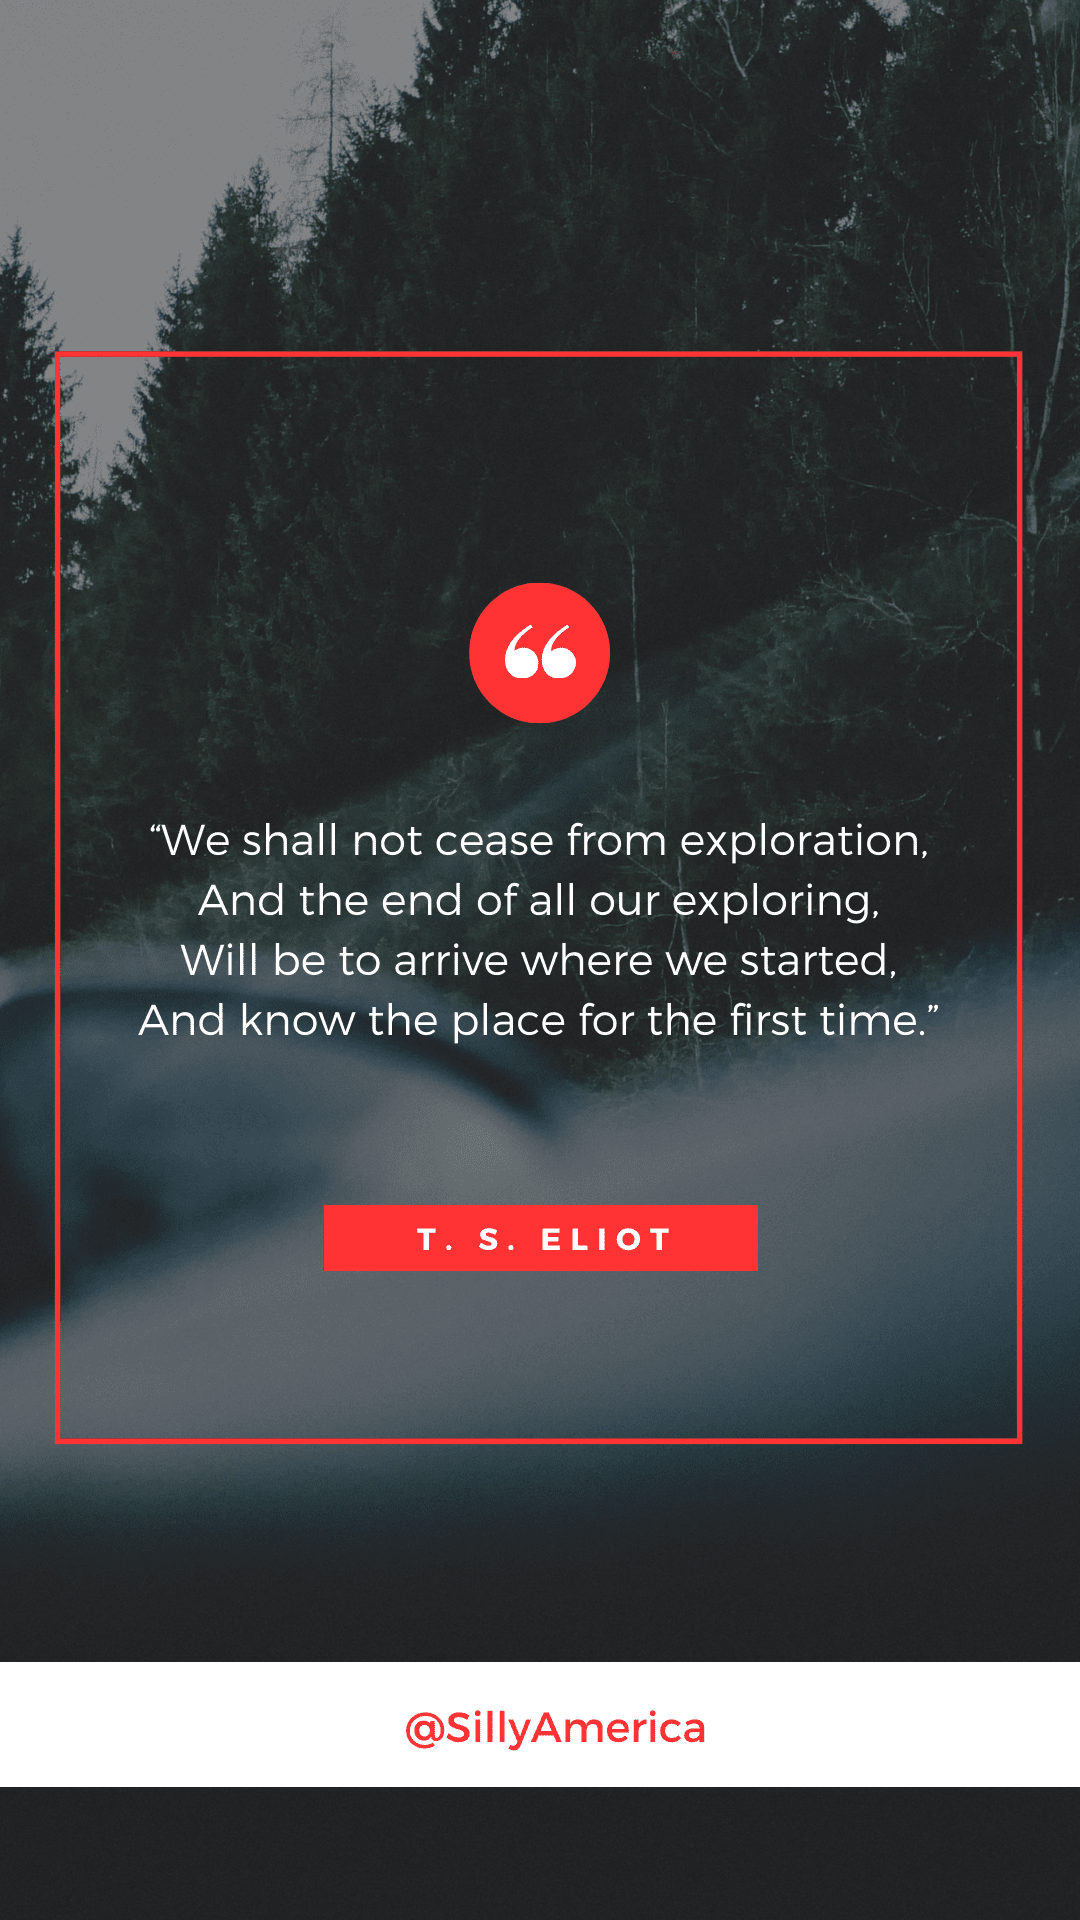 “We shall not cease from exploration, And the end of all our exploring, Will be to arrive where we started, And know the place for the first time.” T. S. Eliot, Four Quartets